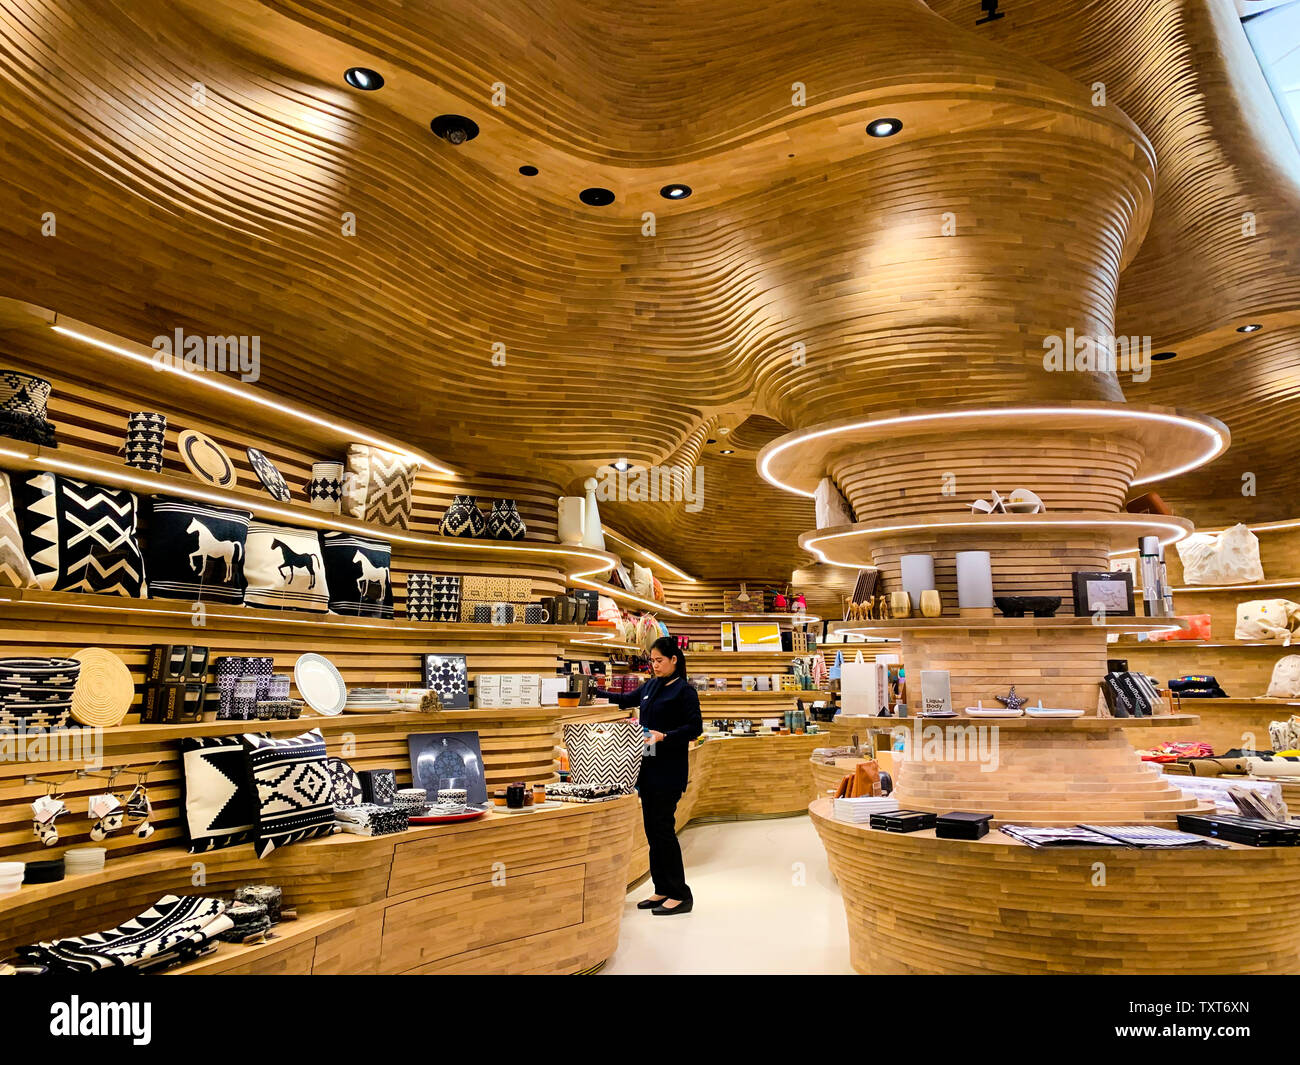 Wooden, dynamic and organic ceiling of the National Museum shop. April 2019, Doha. Stock Photo